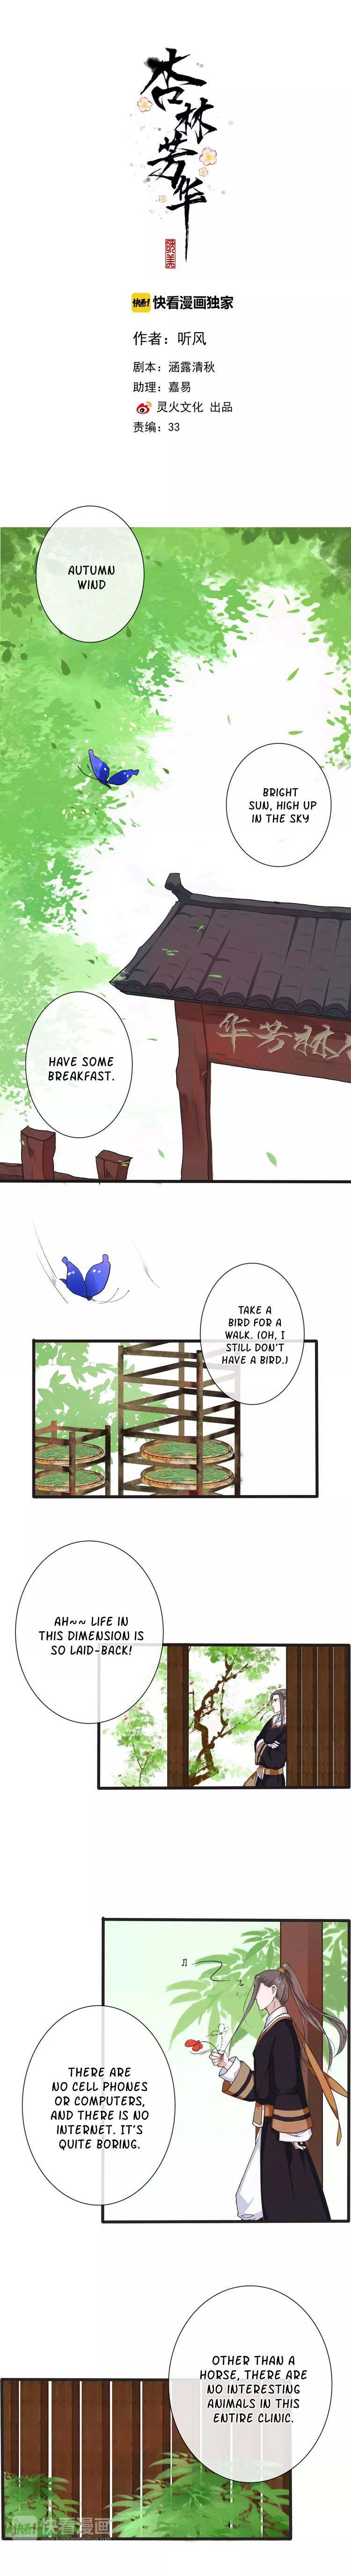 The Beauty Of The Appricot Forest - Page 2